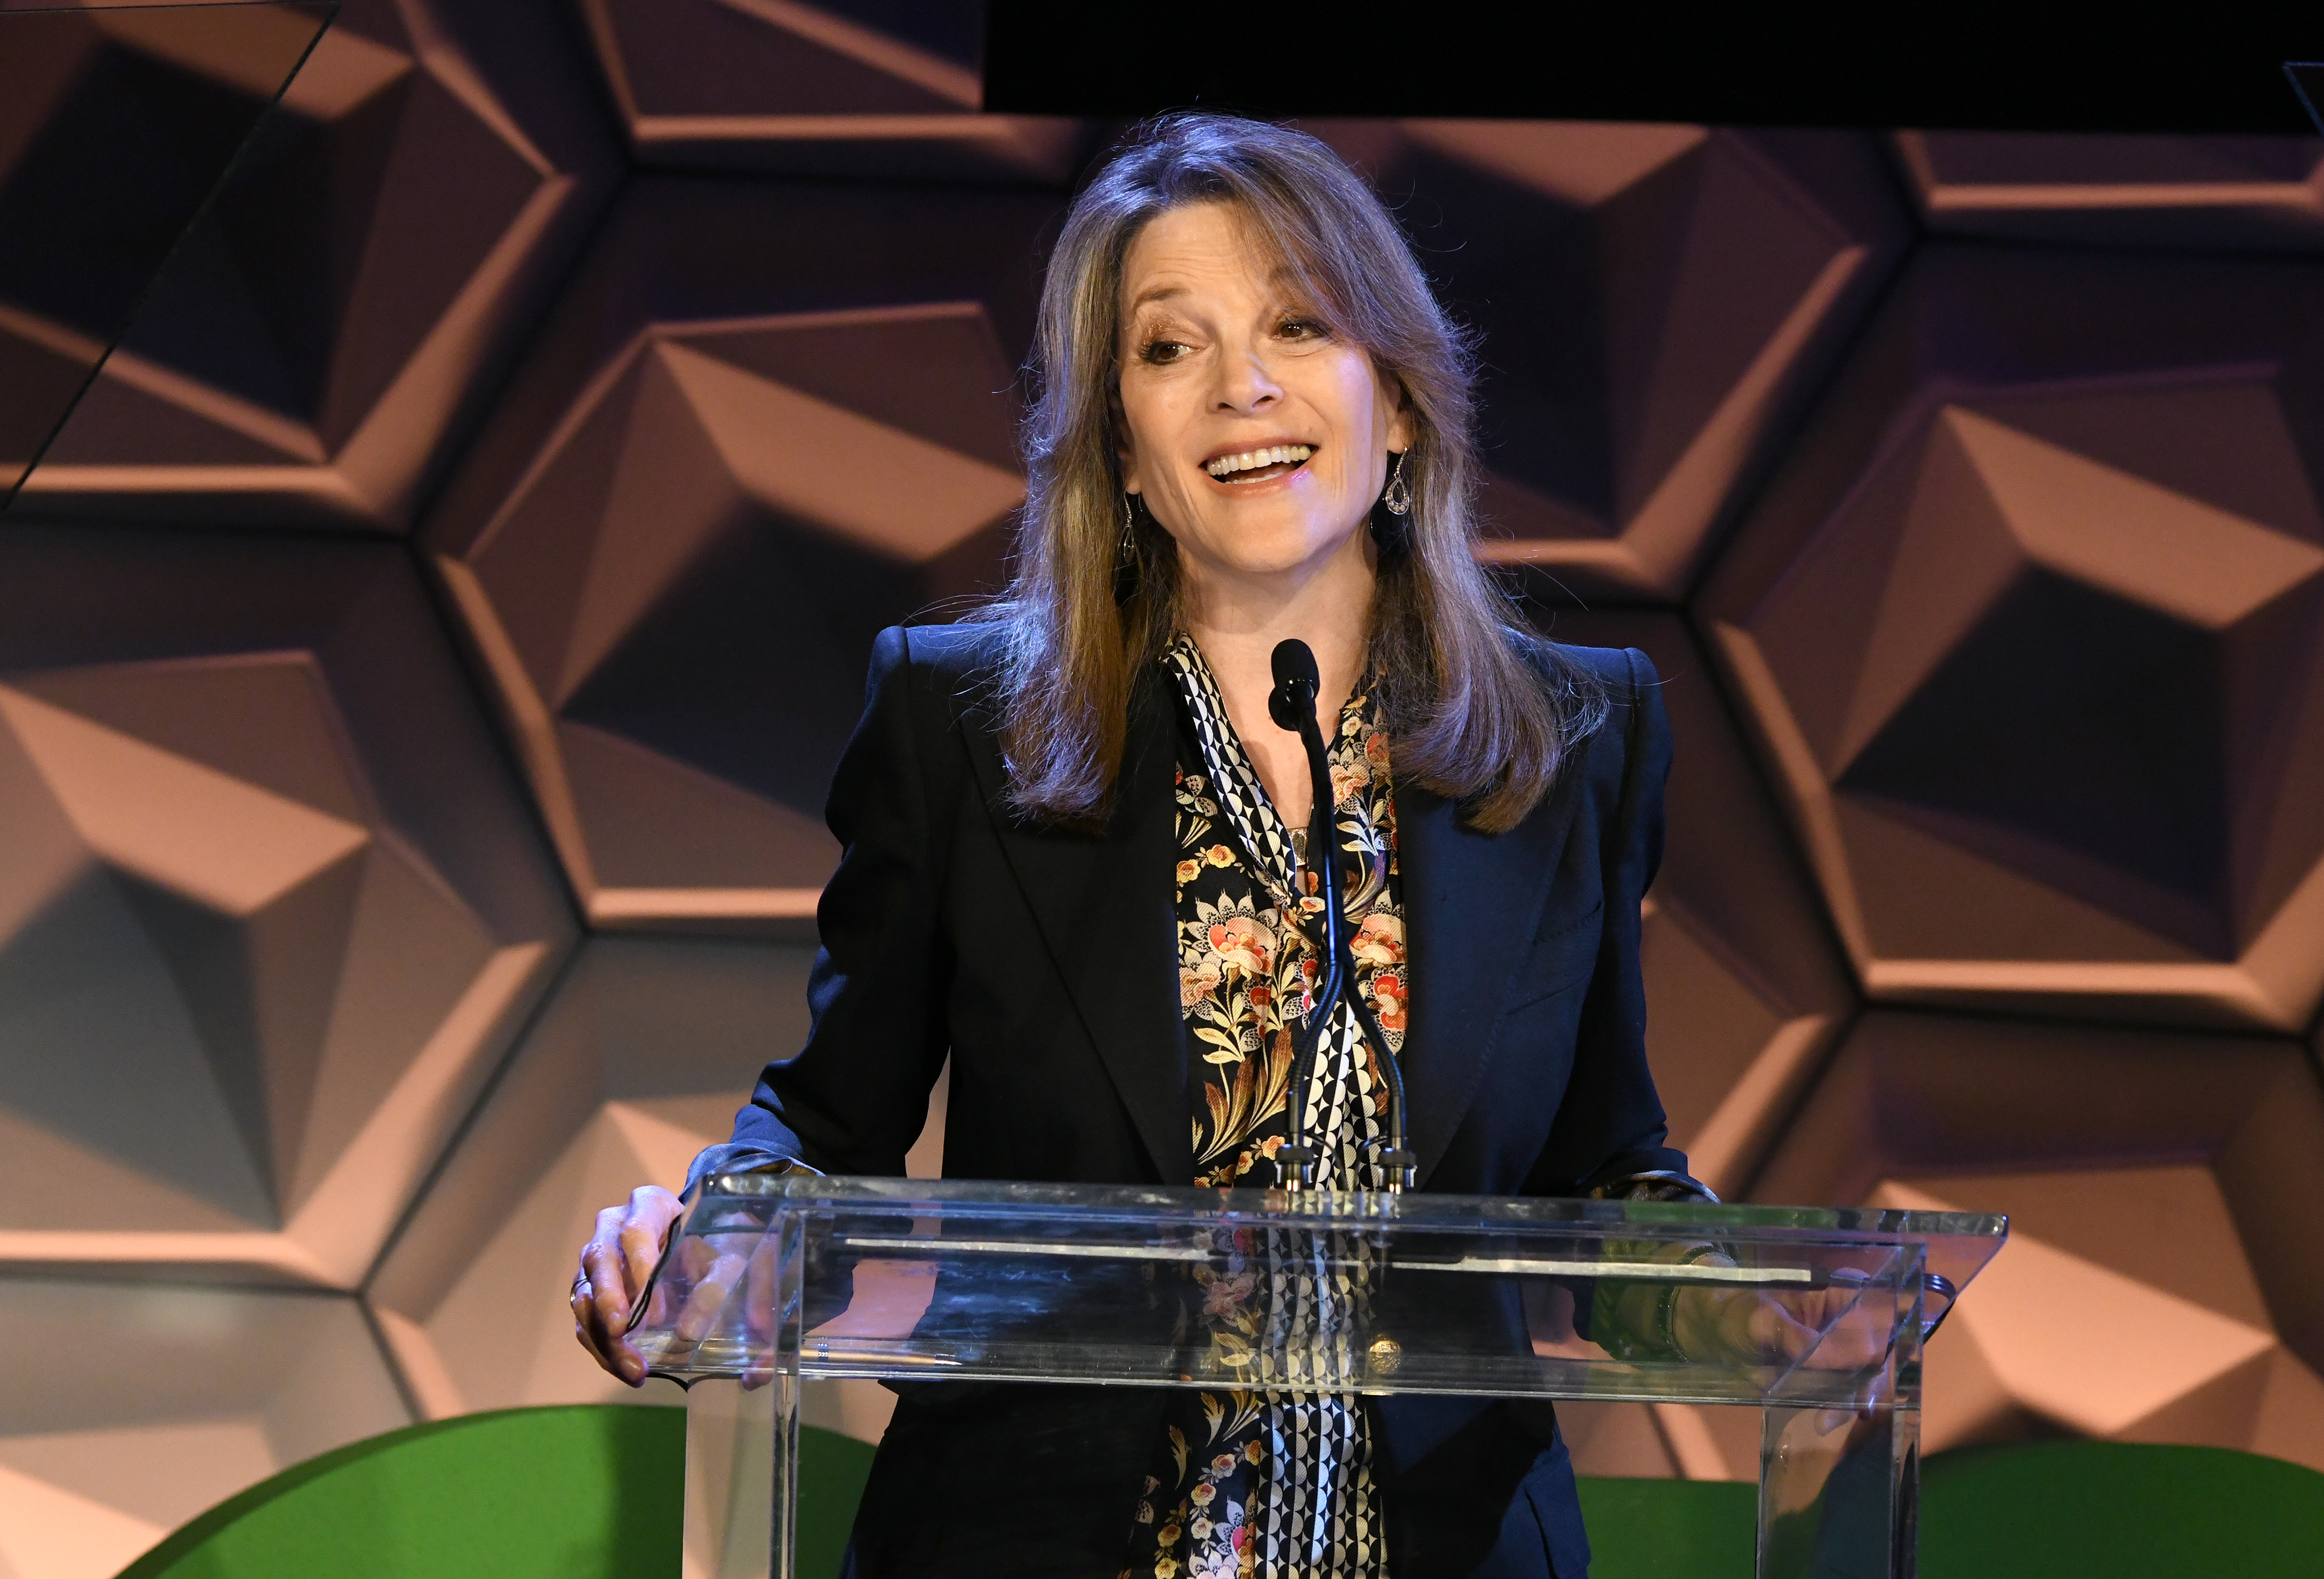 BEVERLY HILLS, CALIFORNIA - MAY 30: 2020 Presidential Candidate Marianne Williamson speaks onstage at the EMA IMPACT Summit - Day Two at Montage Beverly Hills on May 30, 2019 in Beverly Hills, California. (Photo by Michael Kovac/Getty Images for The Environmental Media Association)